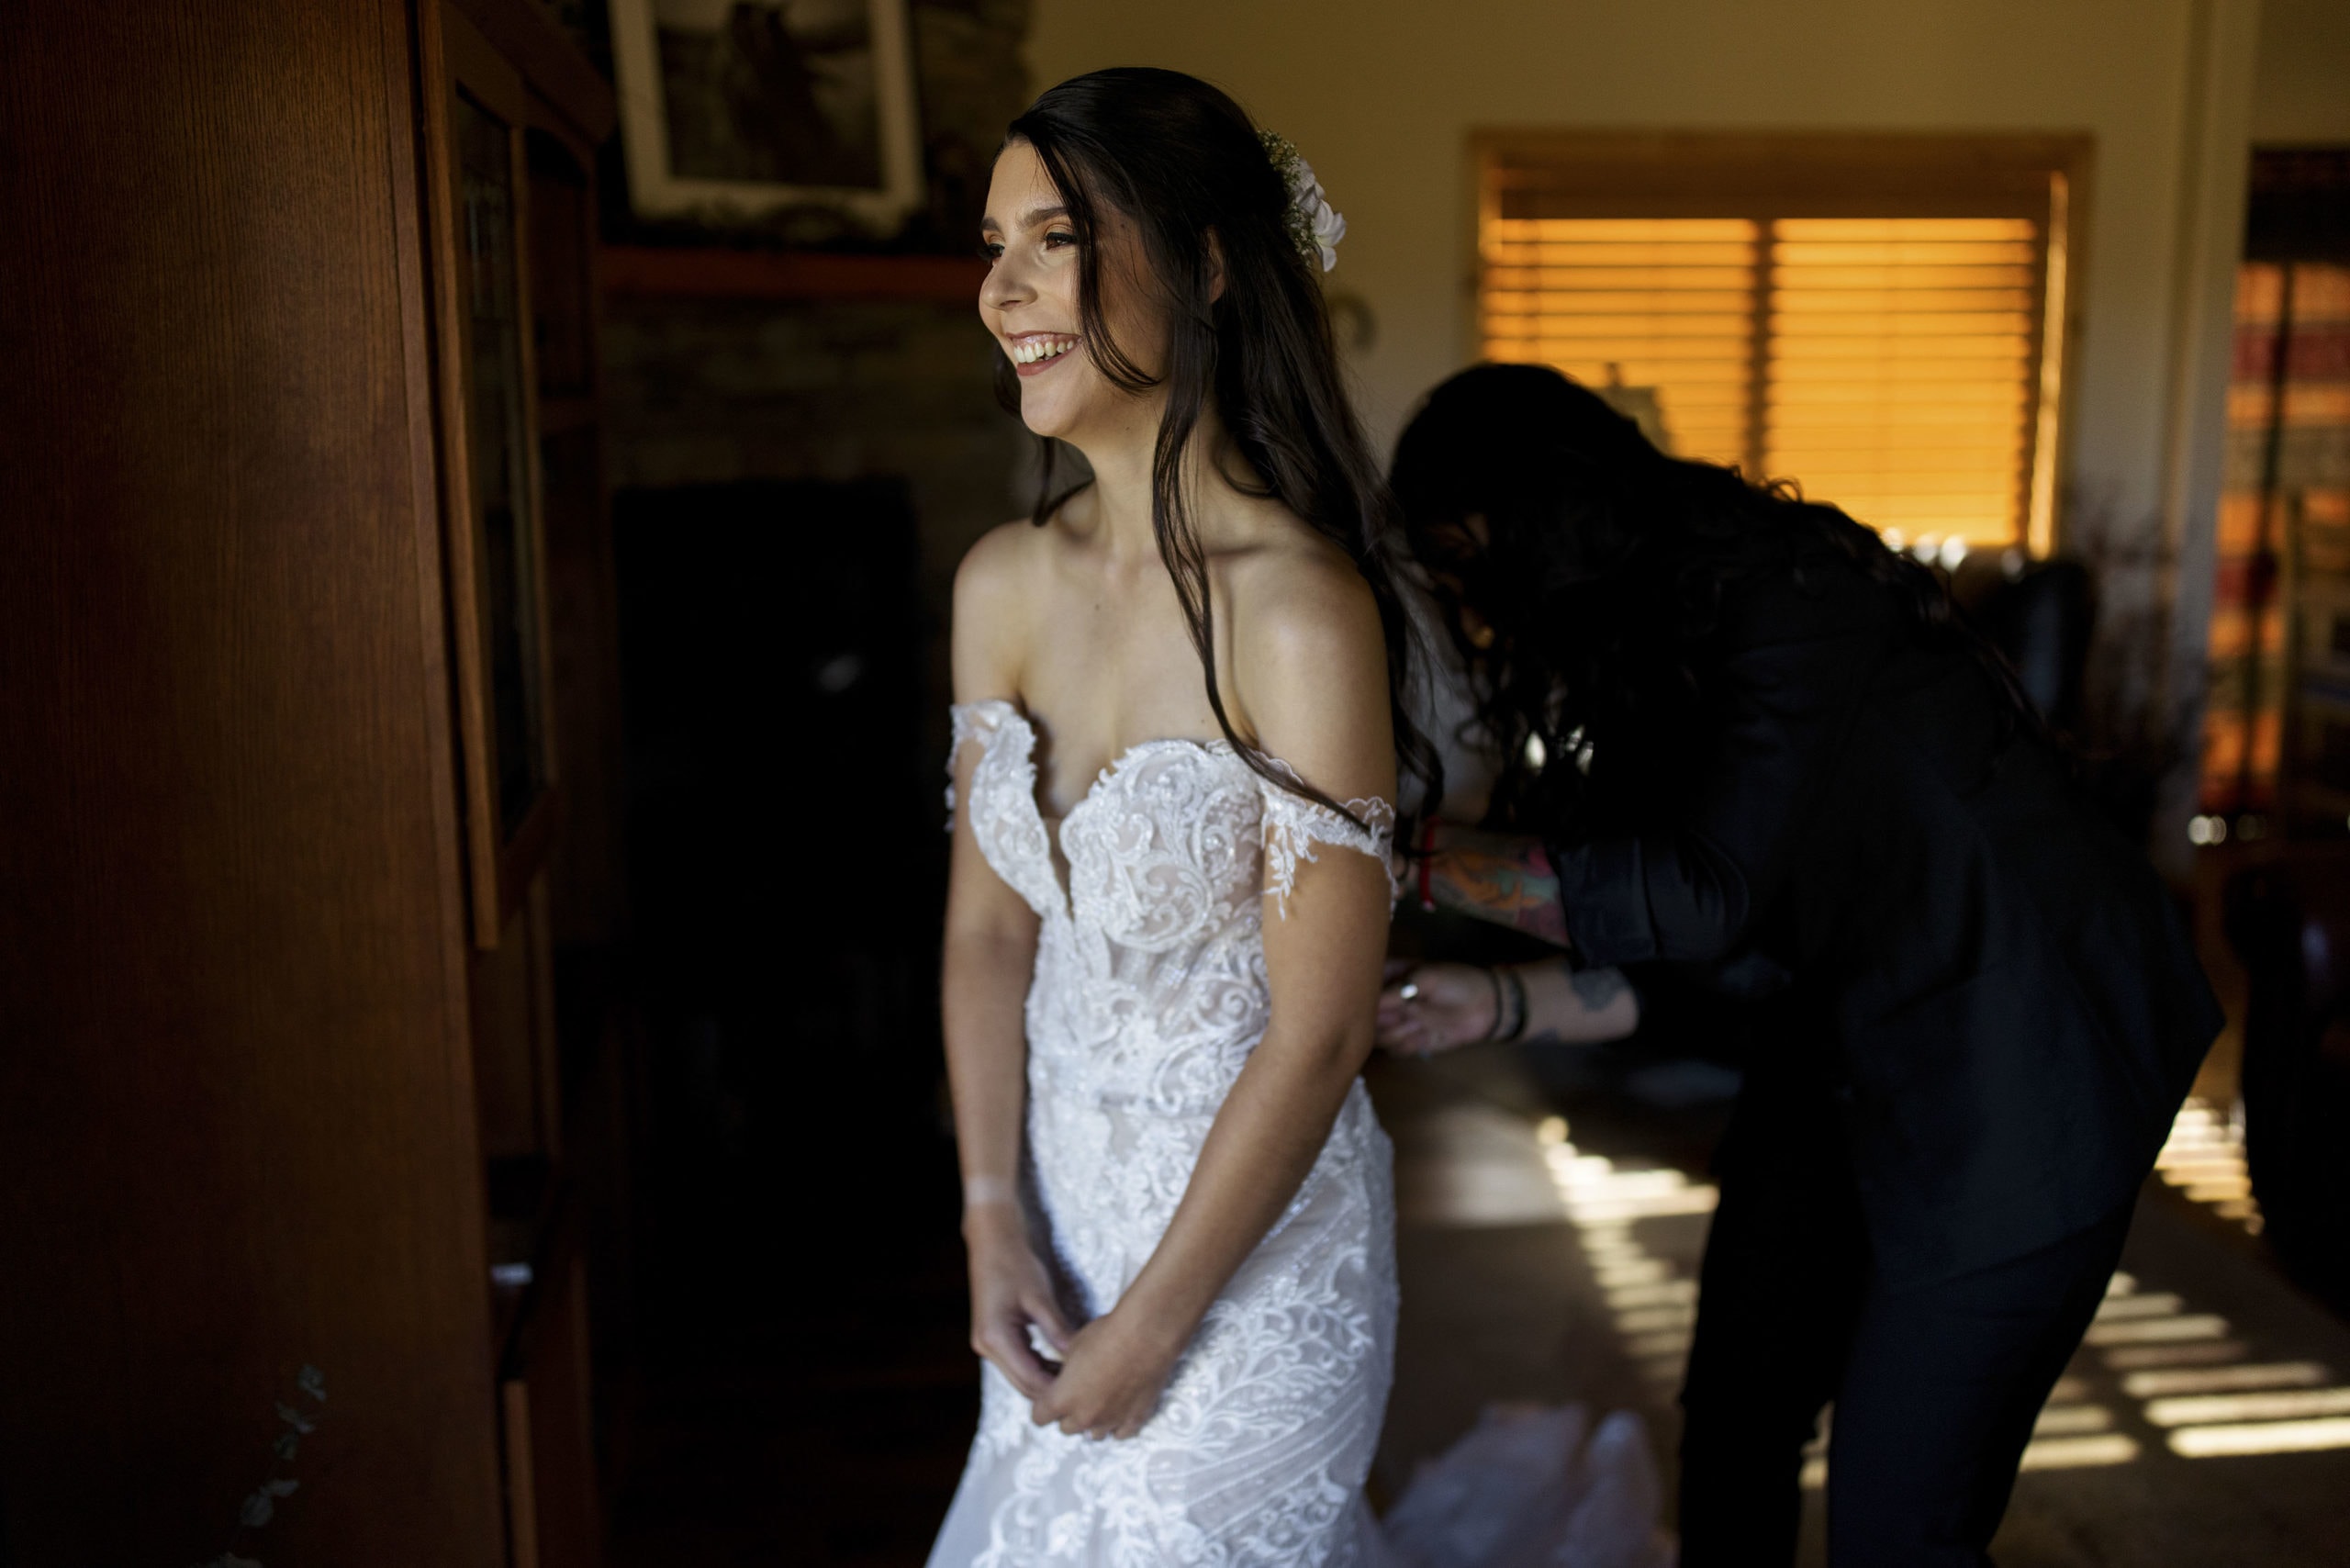 Briana gets some help from a friend as she puts her wedding dress on